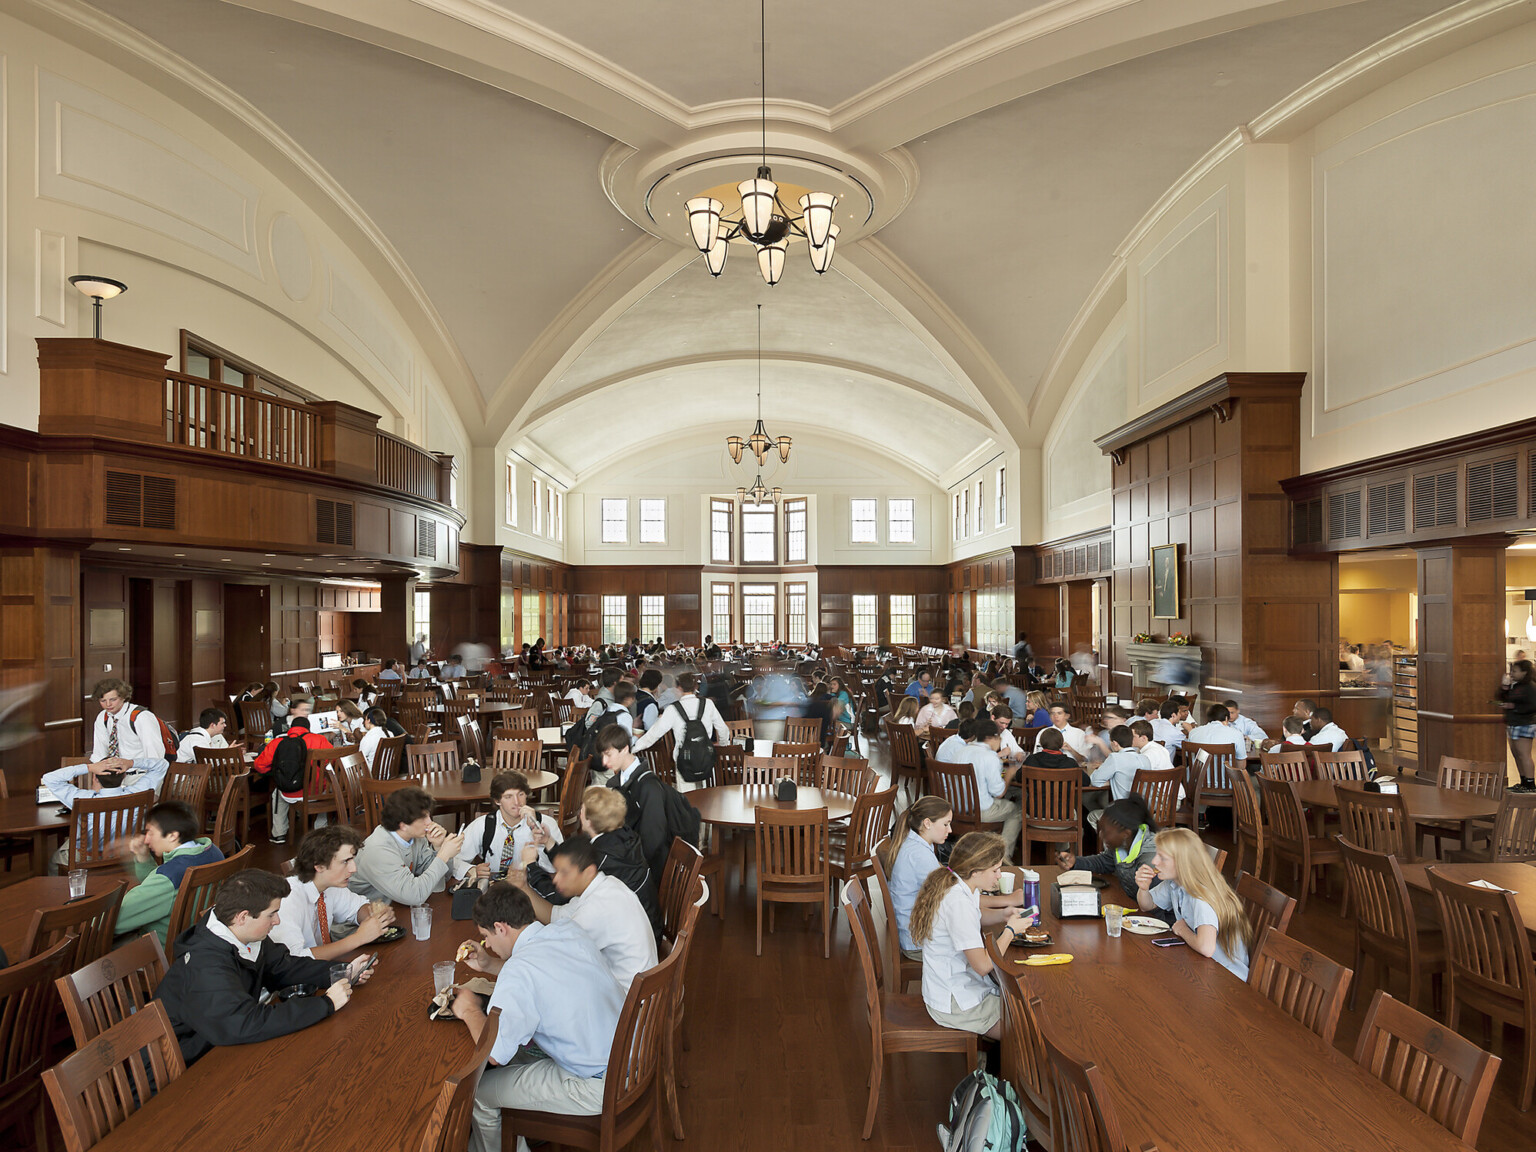 students dine in a 650-seat grand dining hall, vaulted wood beams over traditional cherry wood tables and chairs